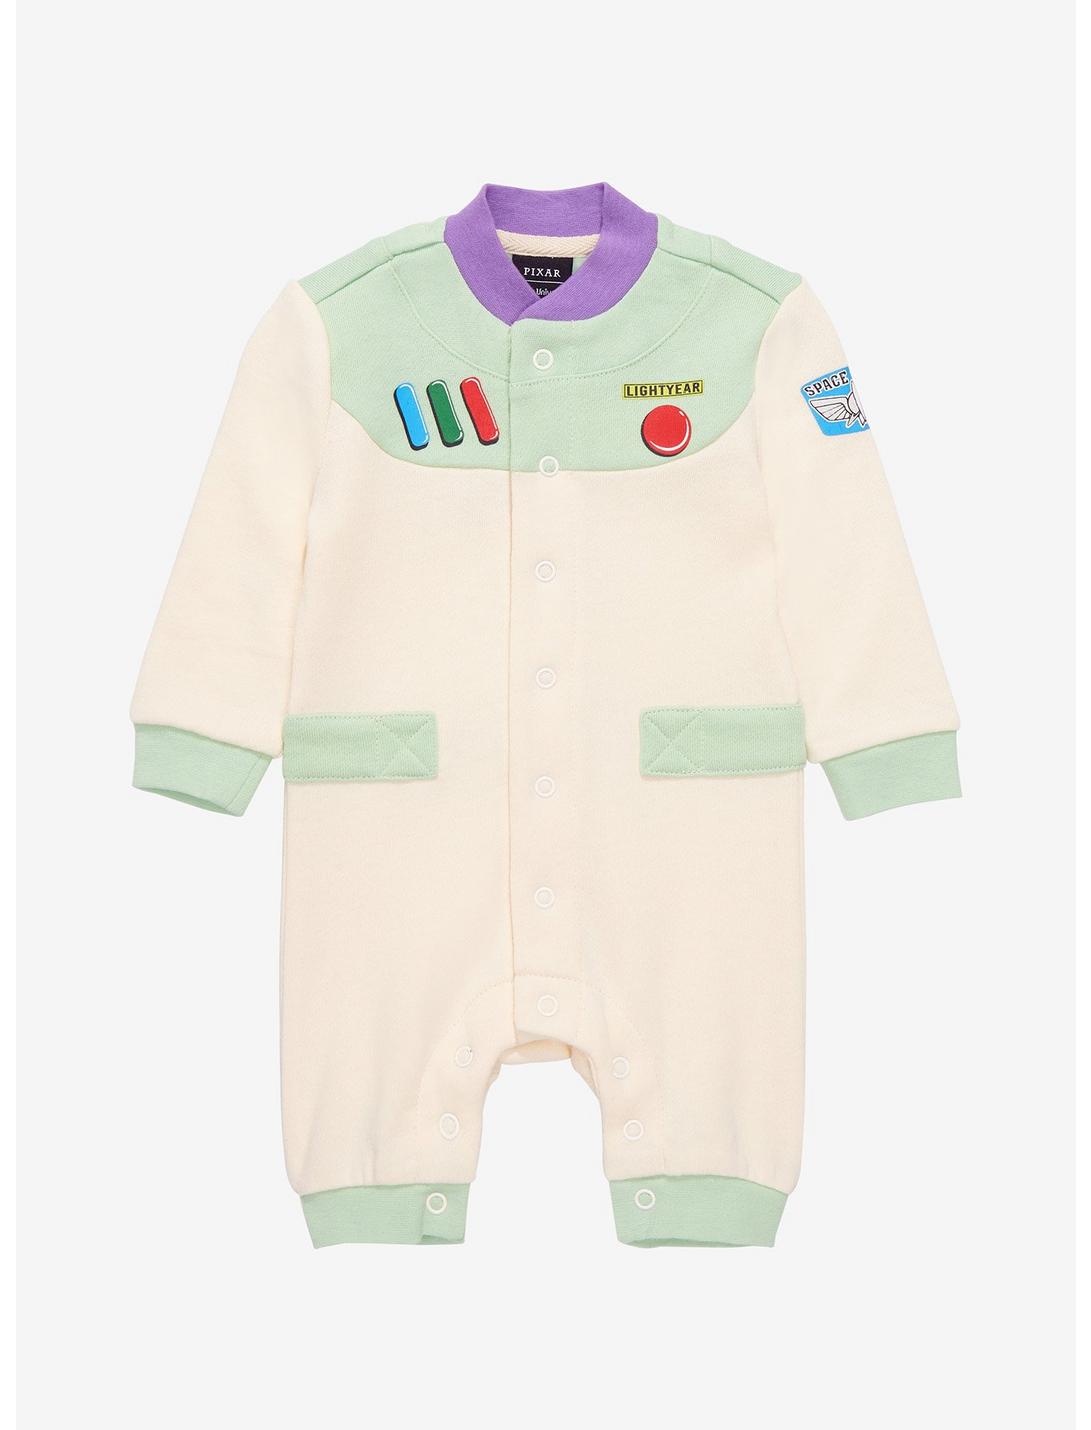 Disney Pixar Toy Story Buzz Lightyear Spacesuit Infant One-Piece - BoxLunch Exclusive  , LIGHT YEARS, hi-res